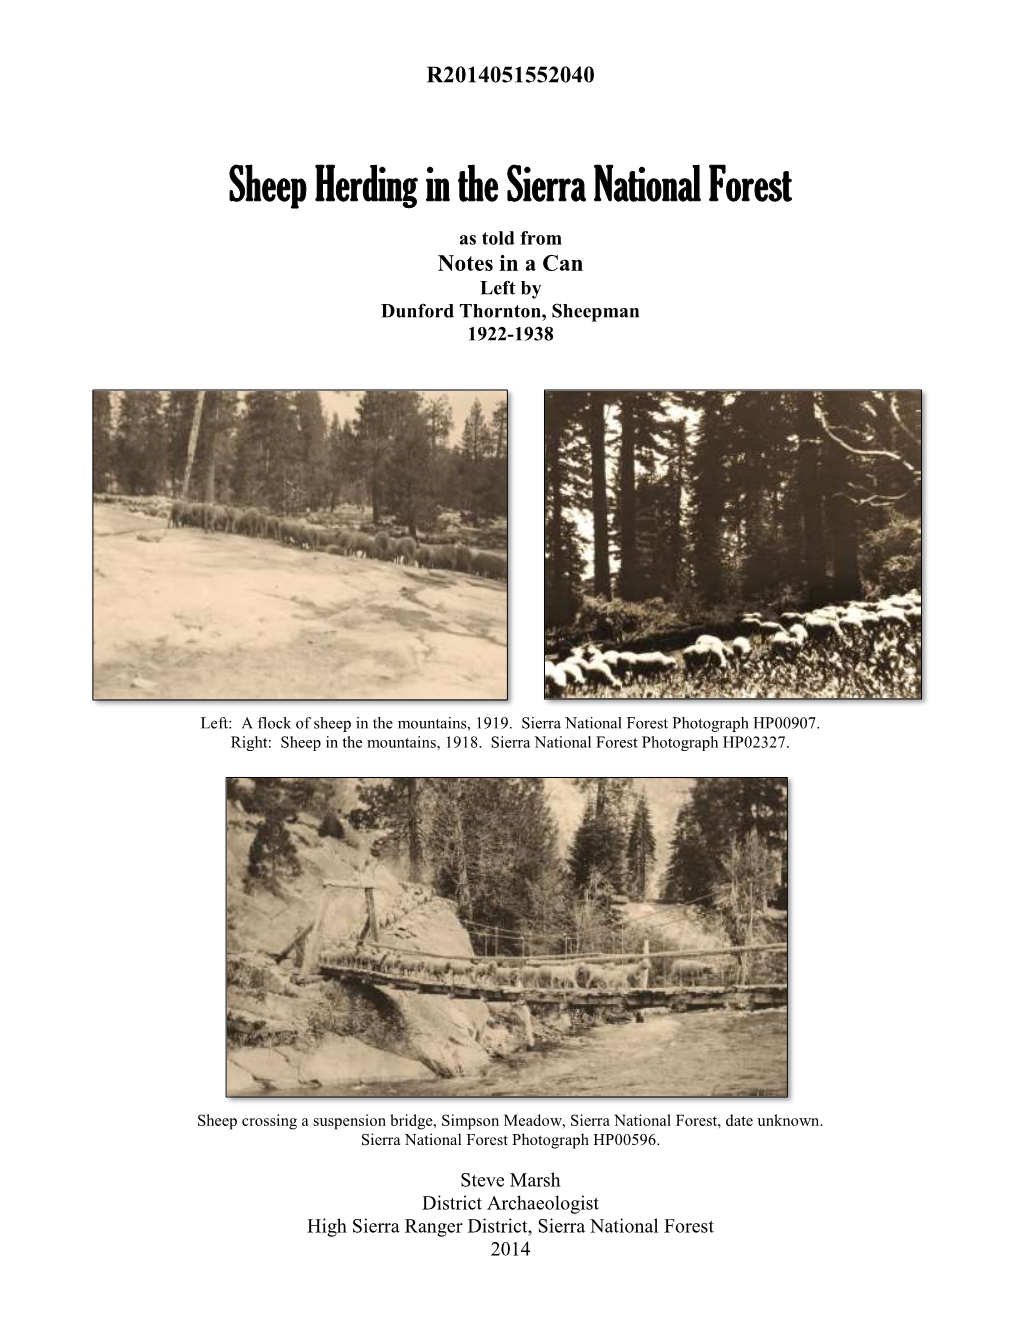 Sheep Herding in the Sierra National Forest, As